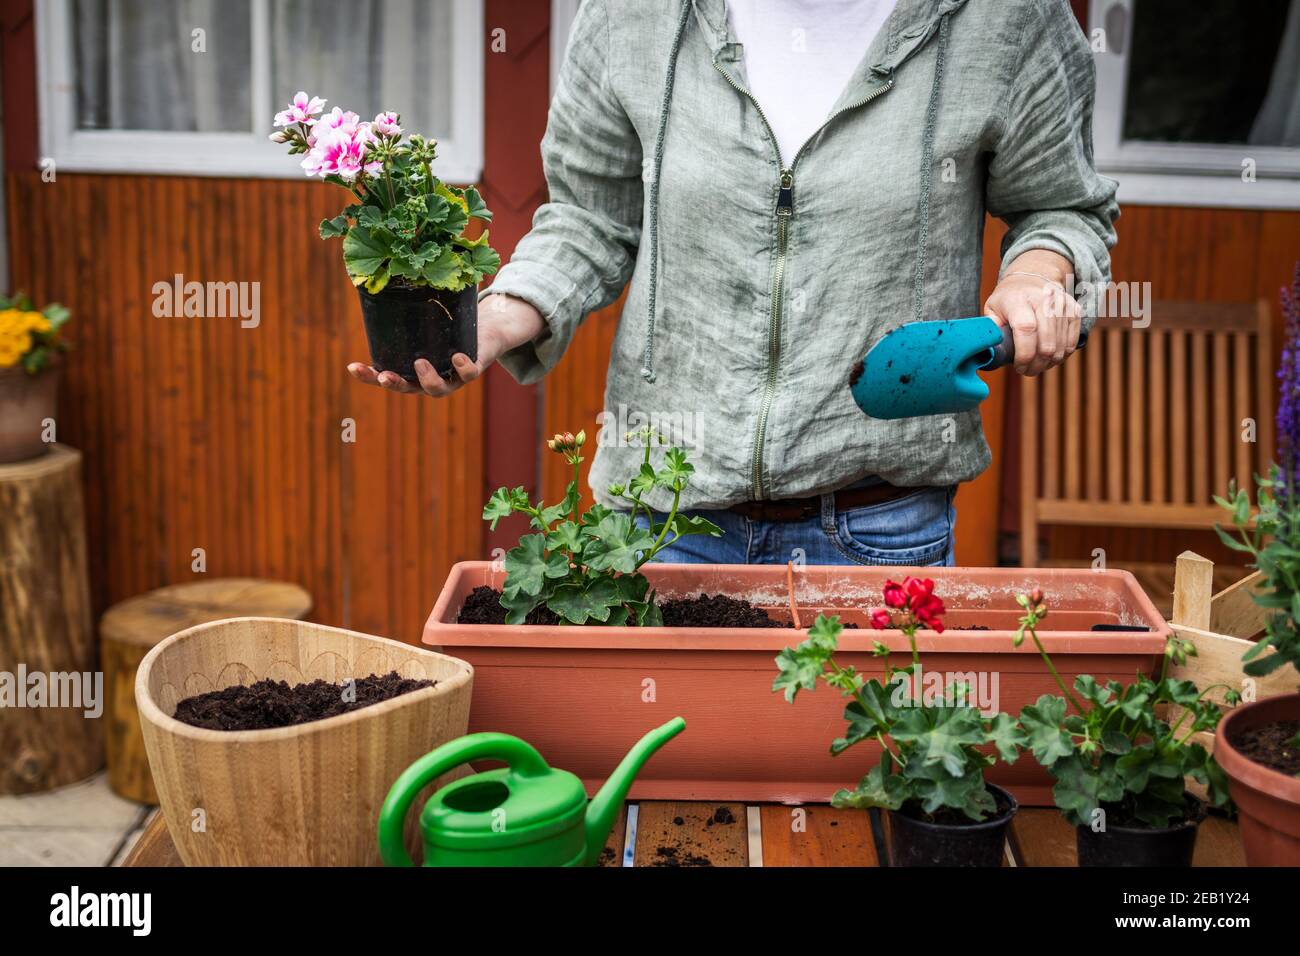 Woman planting geranium flower into window box on wooden table. Florist holding seedling and shovel. Arranging flowers in spring Stock Photo